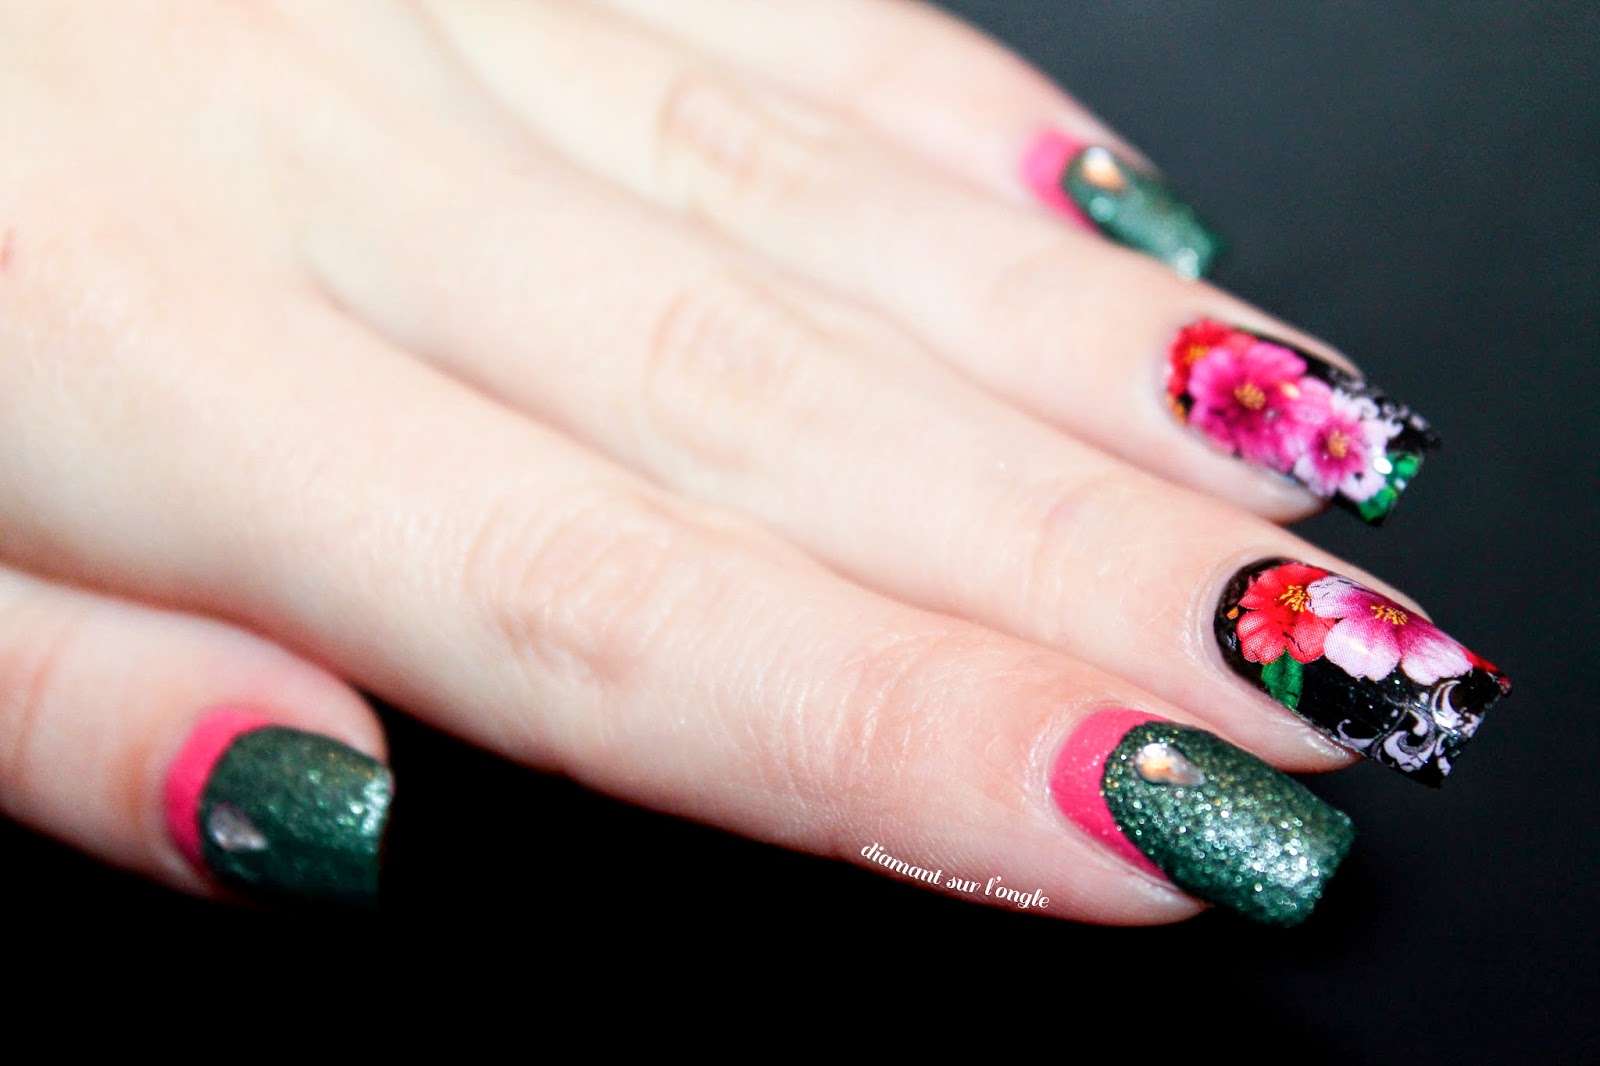 Flowery Nail Art inspired by kitsch english flowers